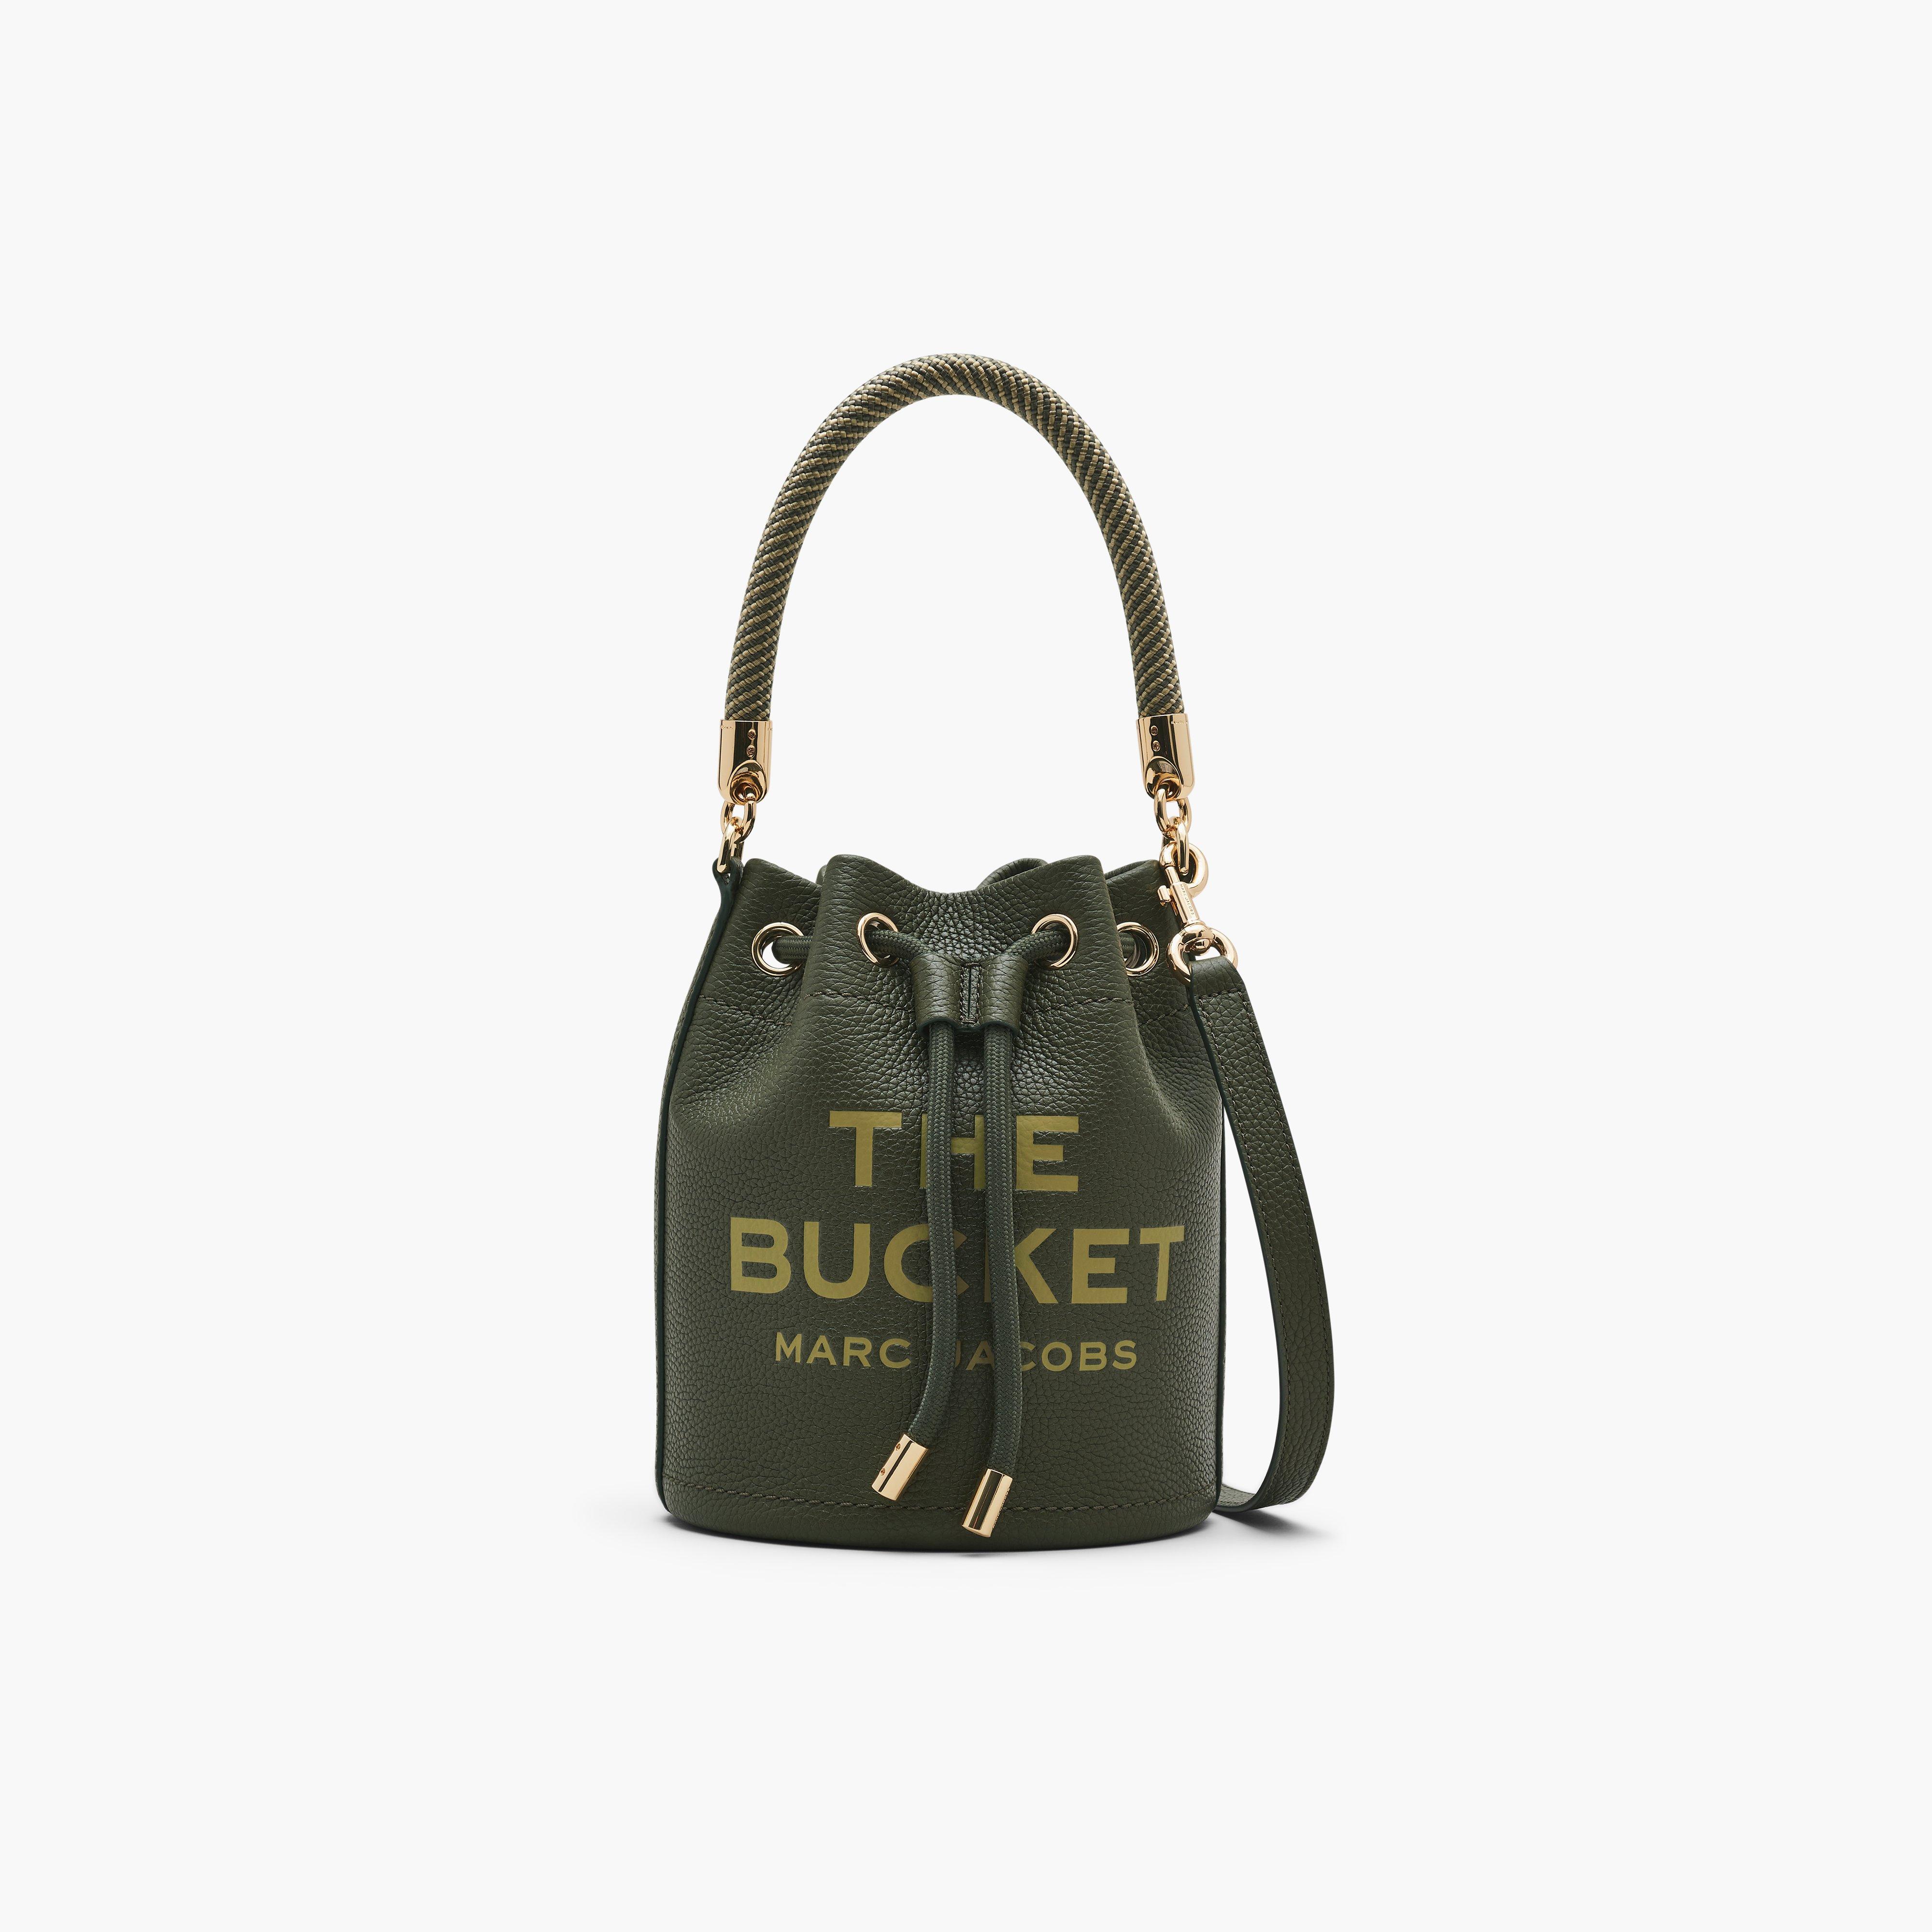 Marc by Marc jacobs The Leather Bucket Bag,FOREST